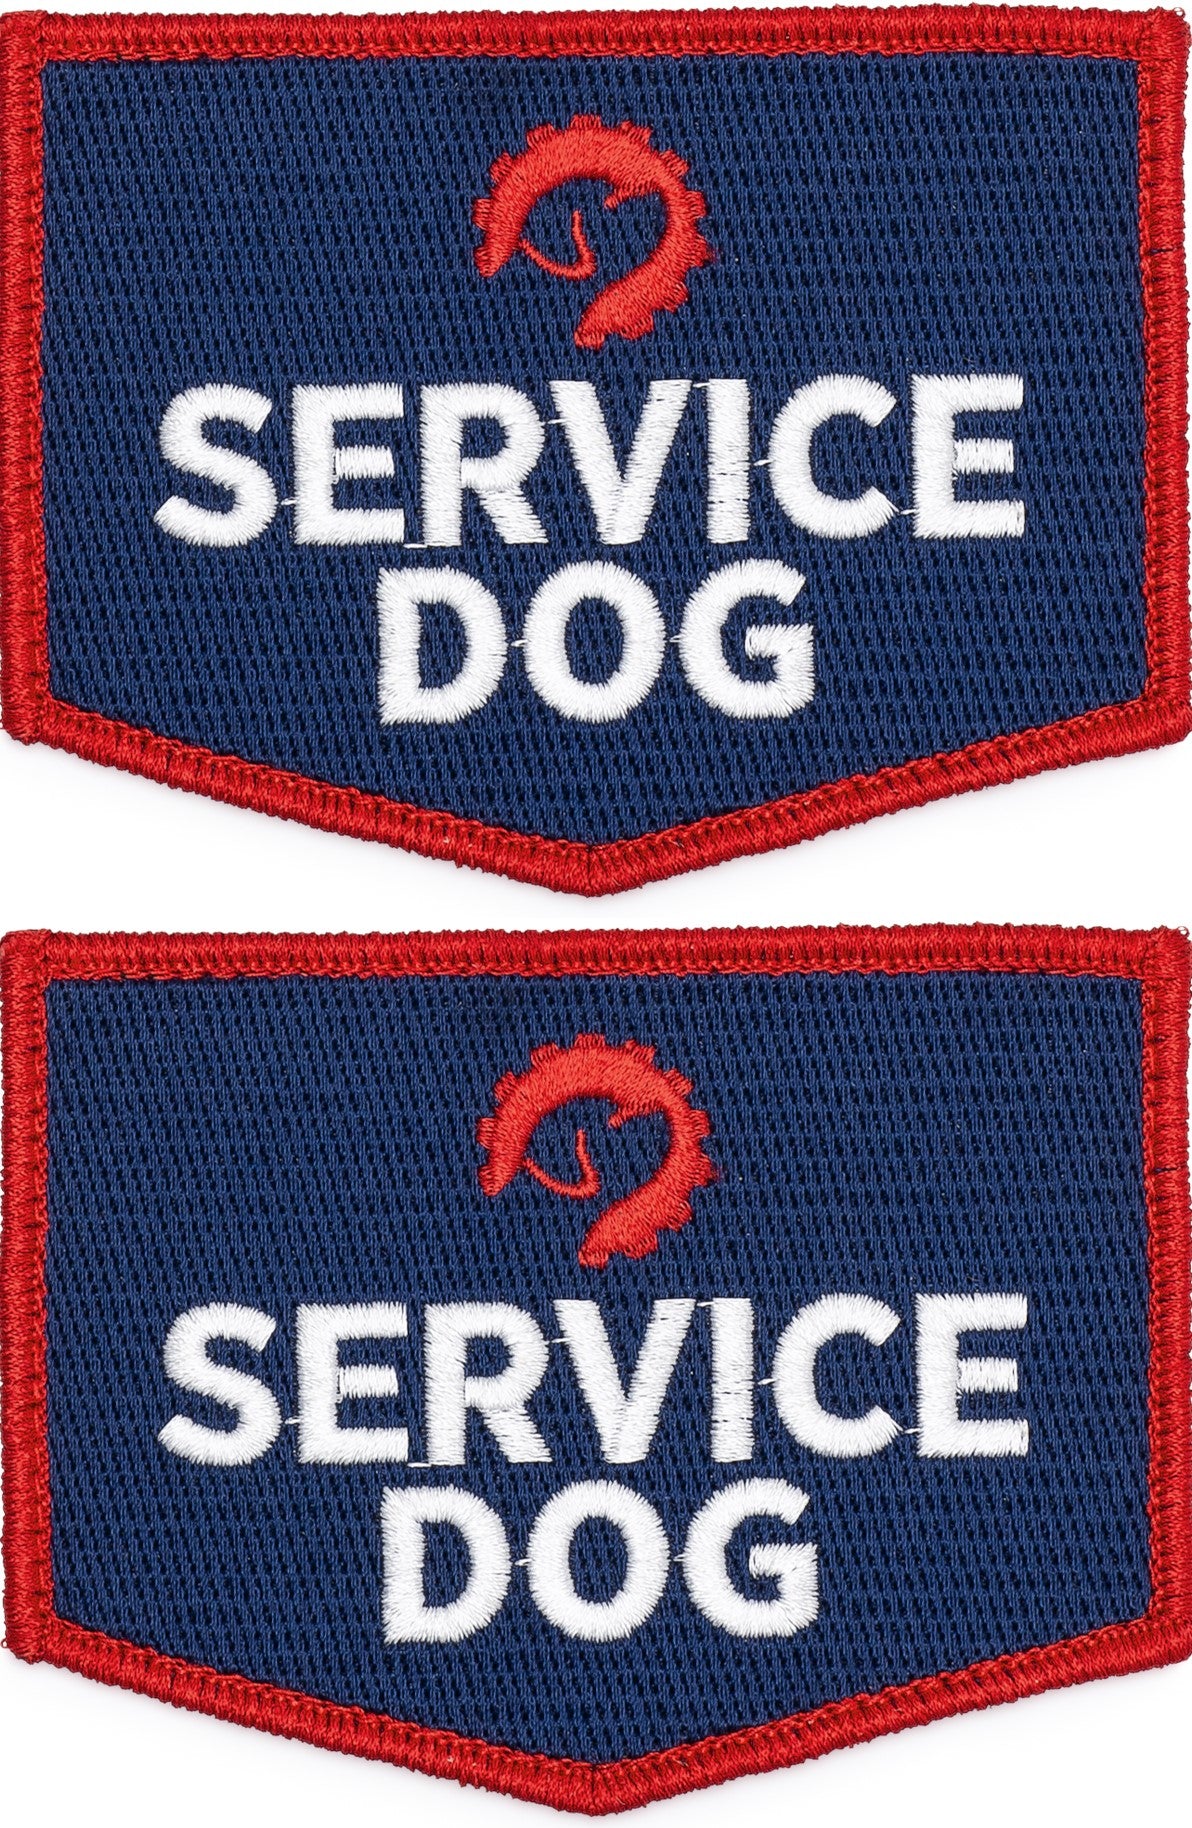 Embroidered Service Dog in Training Dog Patches with Hook/Loop